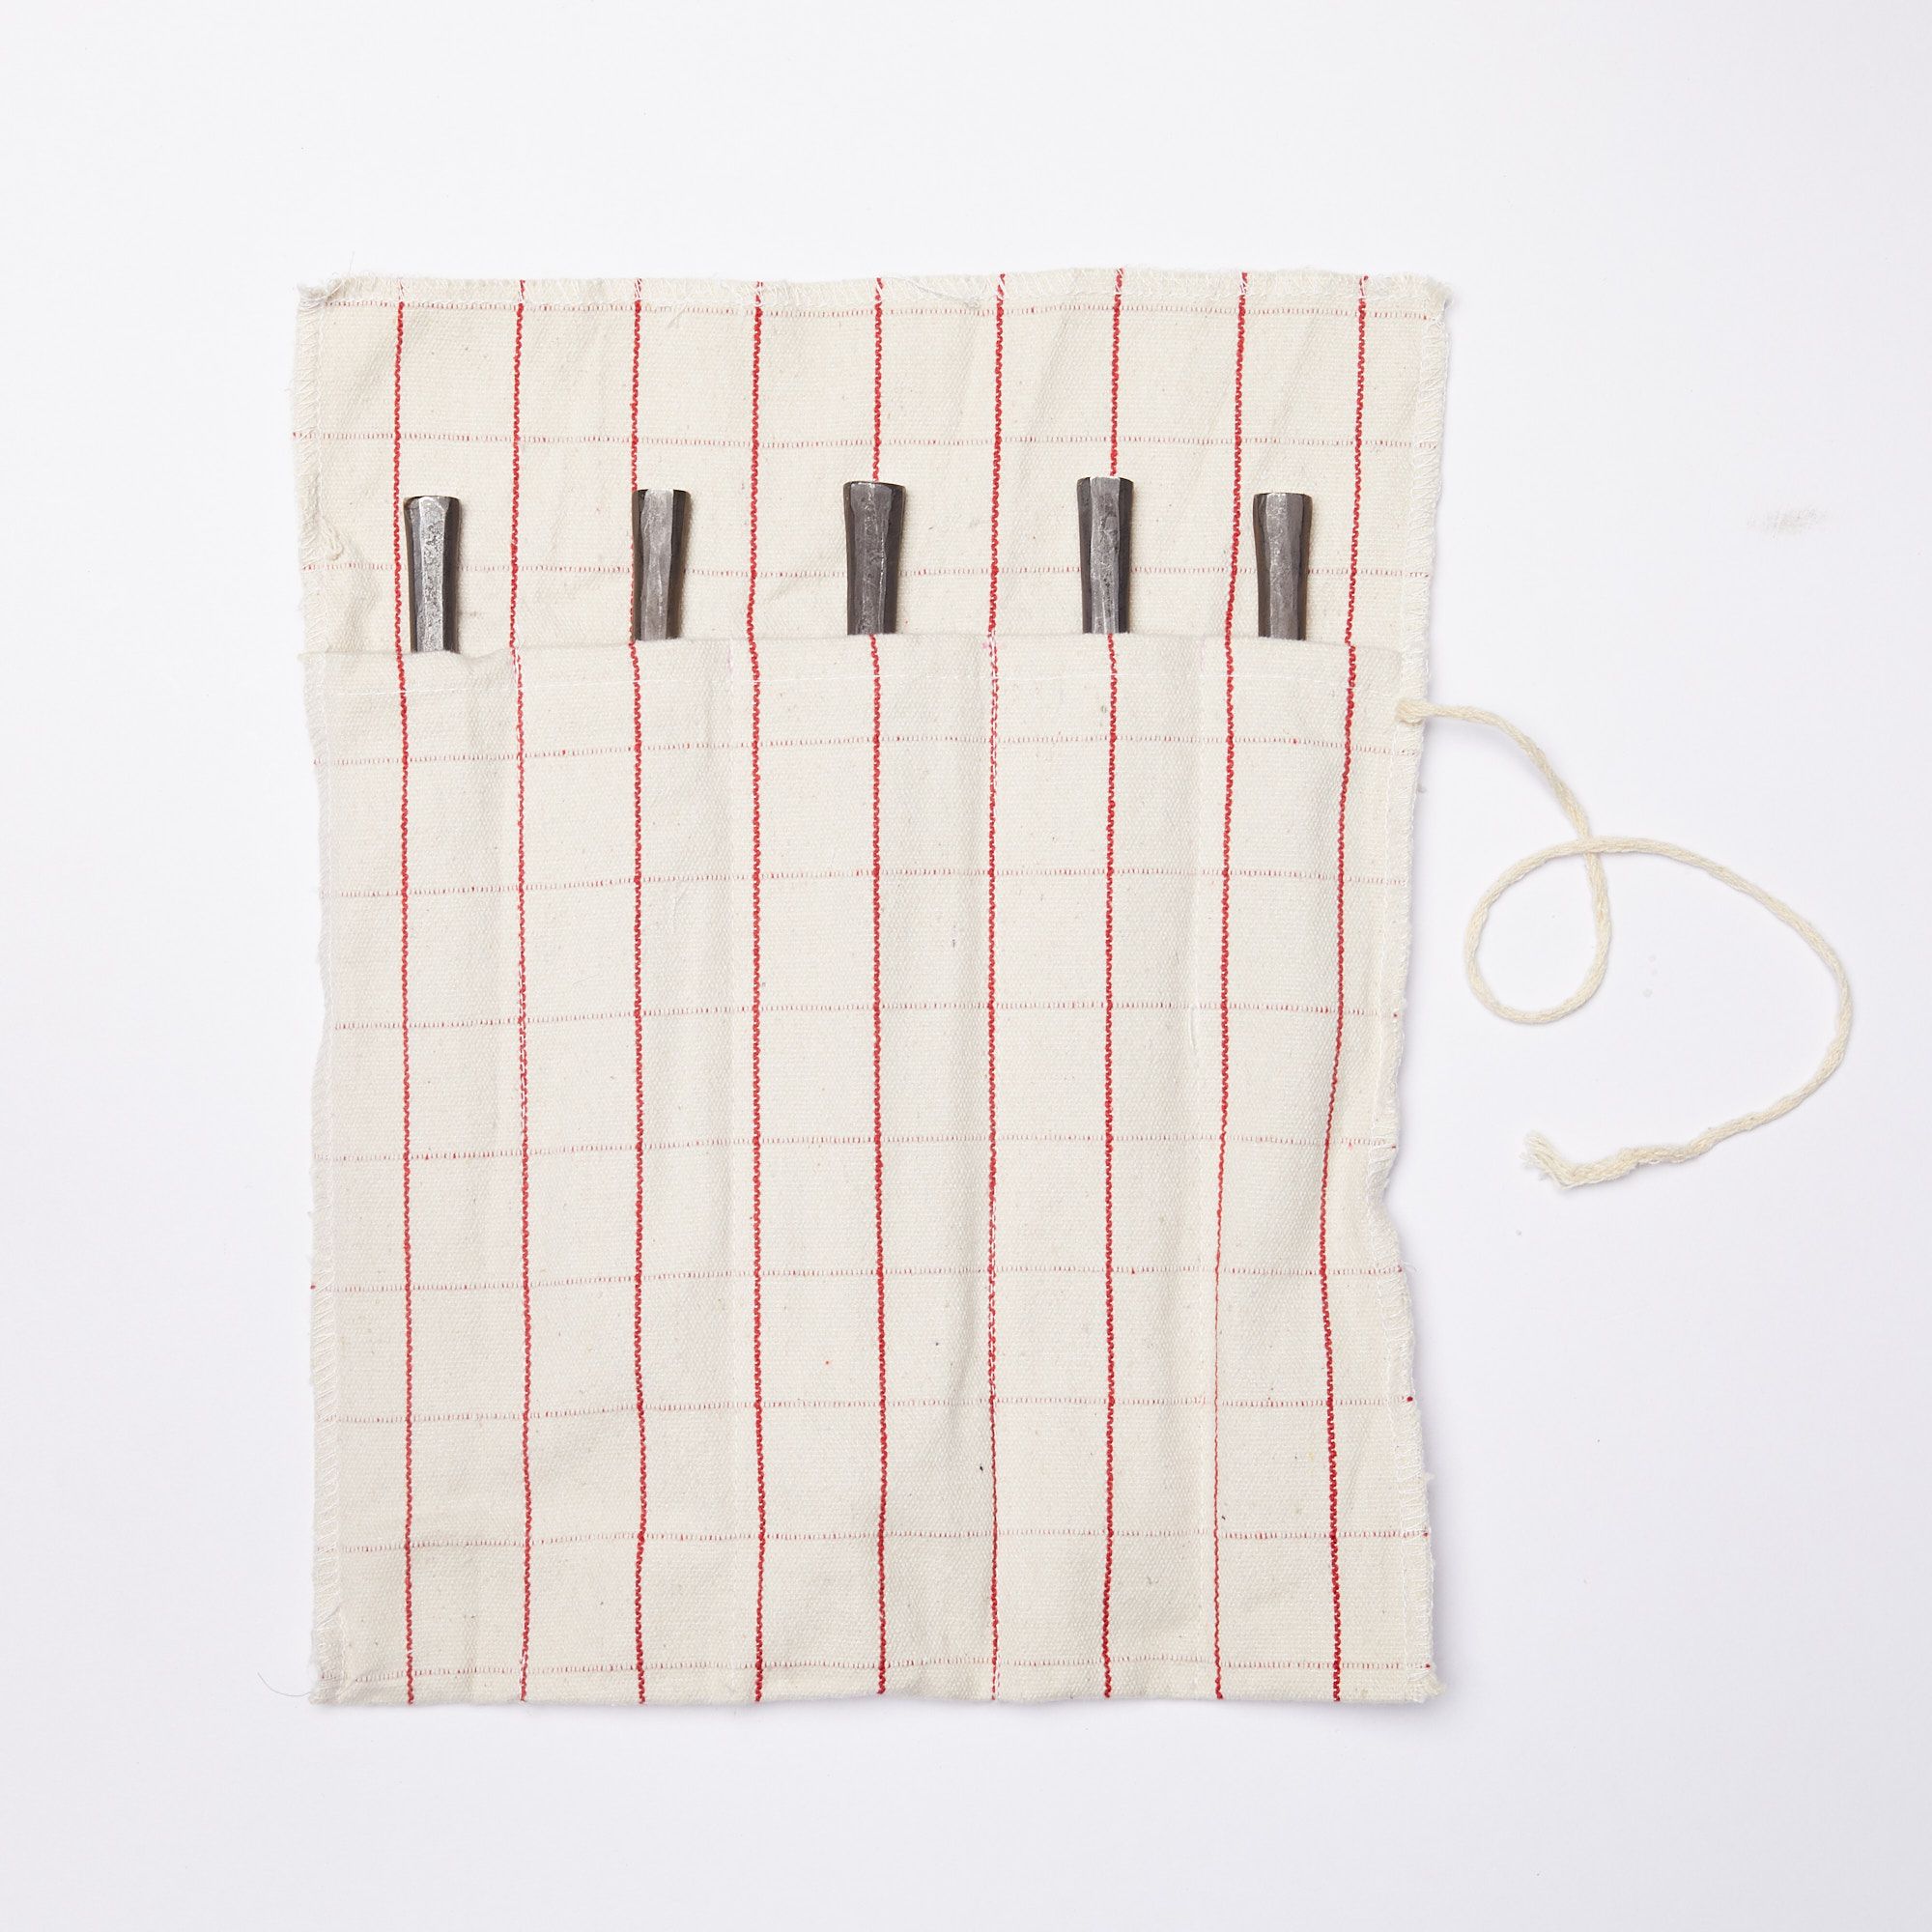 Utensil roll, made of cream color fabric with a thin red grid pattern, unfurled with the end of five utensil handles peeking out of their pockets